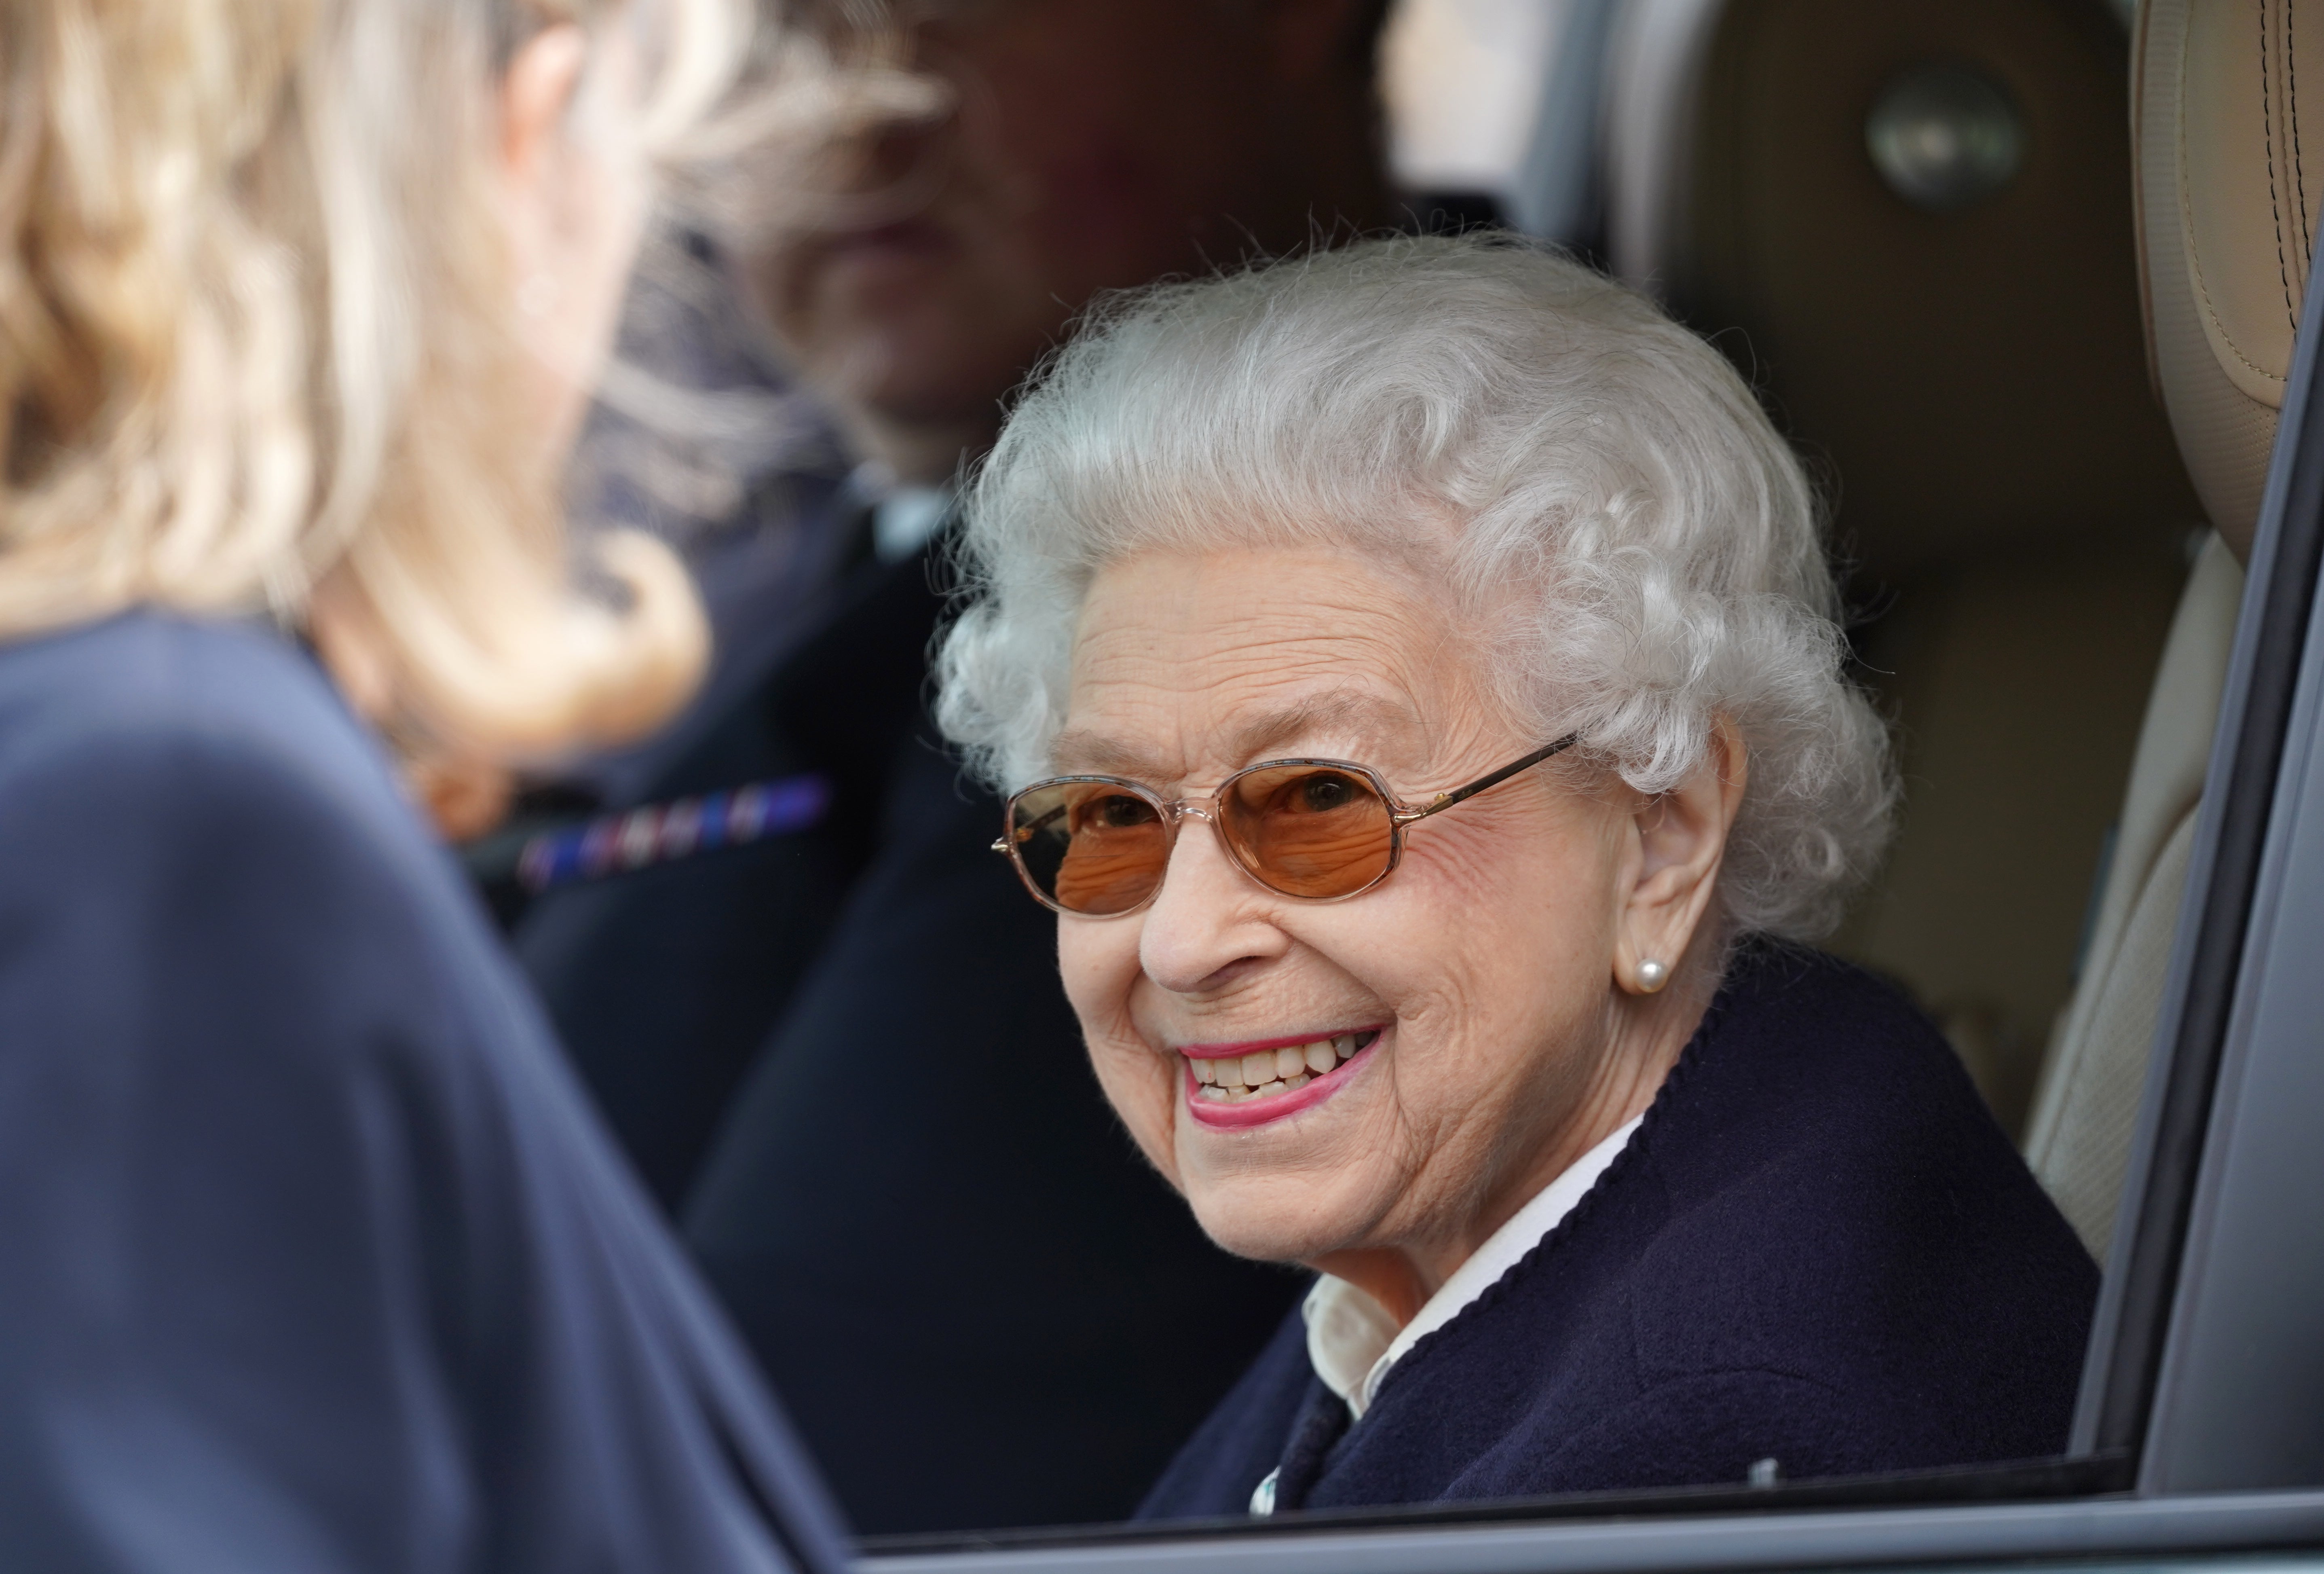 The Queen is expected to watch the flypast from the Buckingham Palace balcony (Steve Parsons/PA)